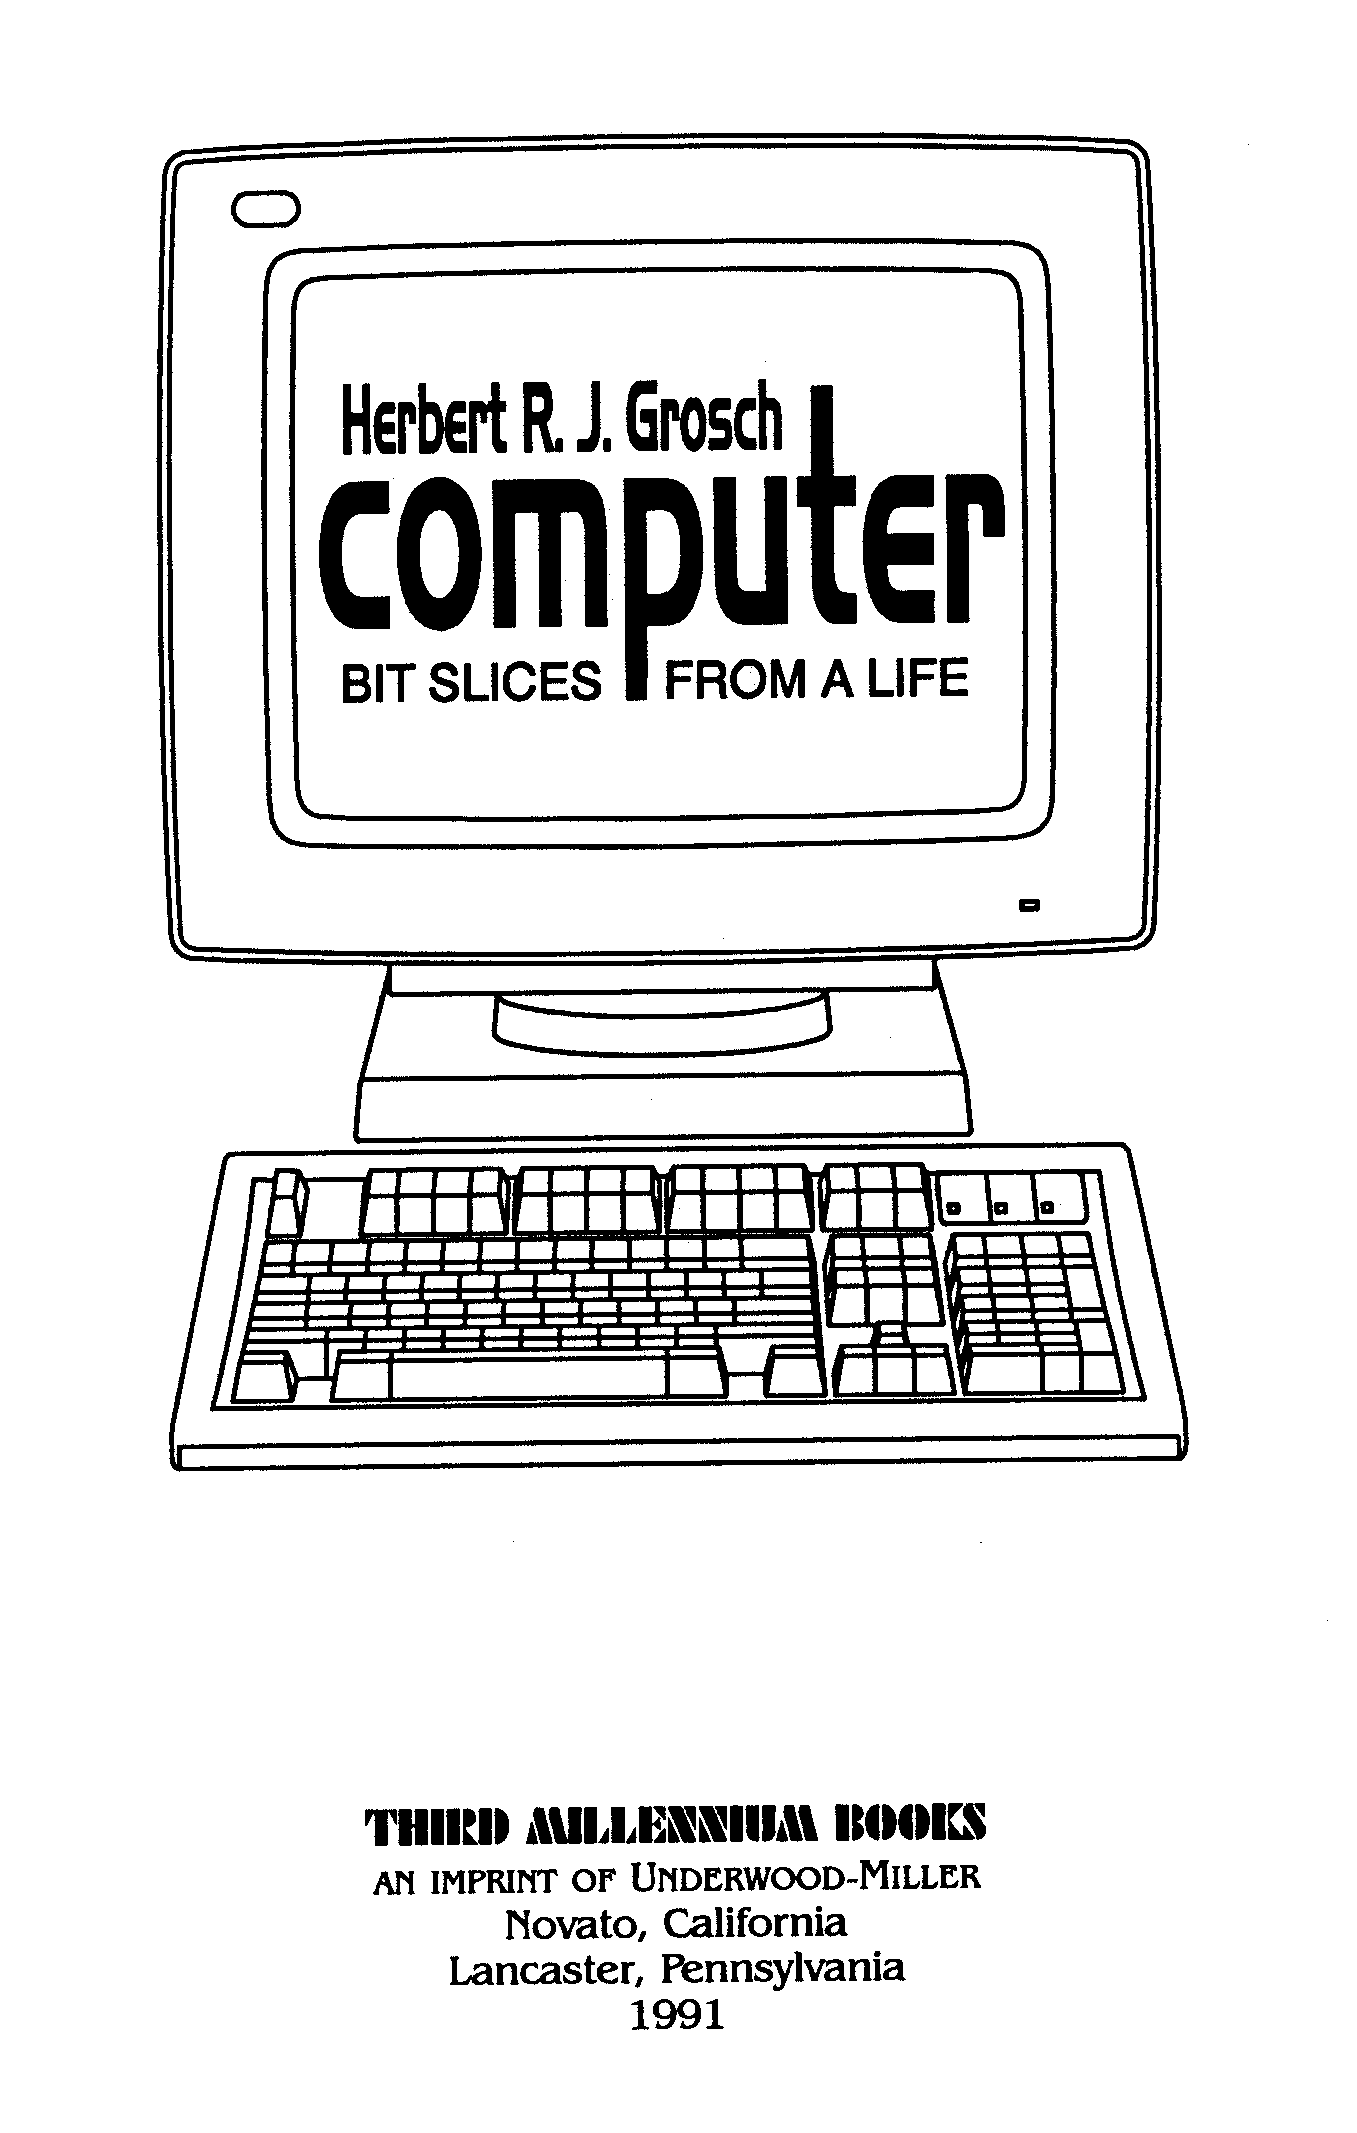 Grosch Computer title page